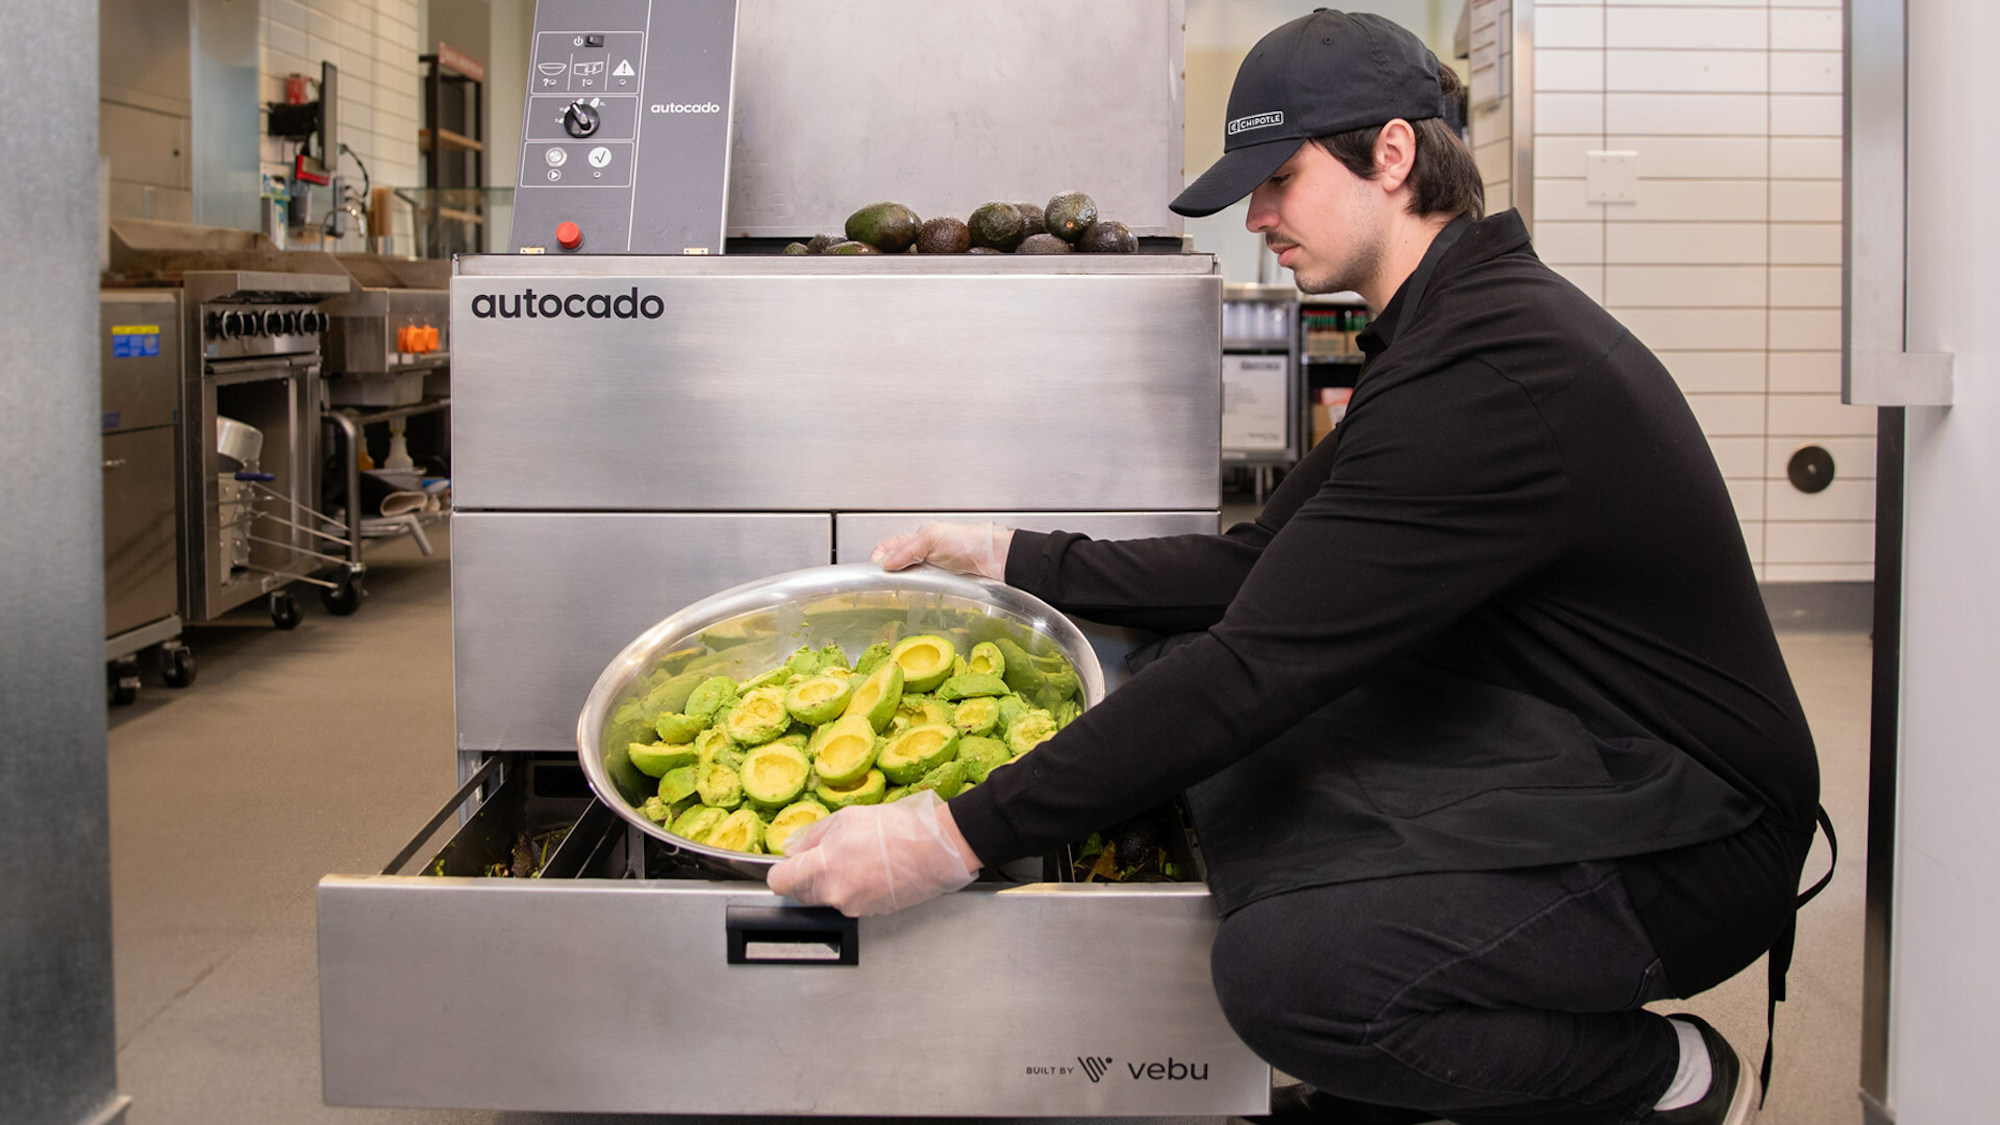 Chipotle worker removing peeled and sliced avocados from Autocado robot